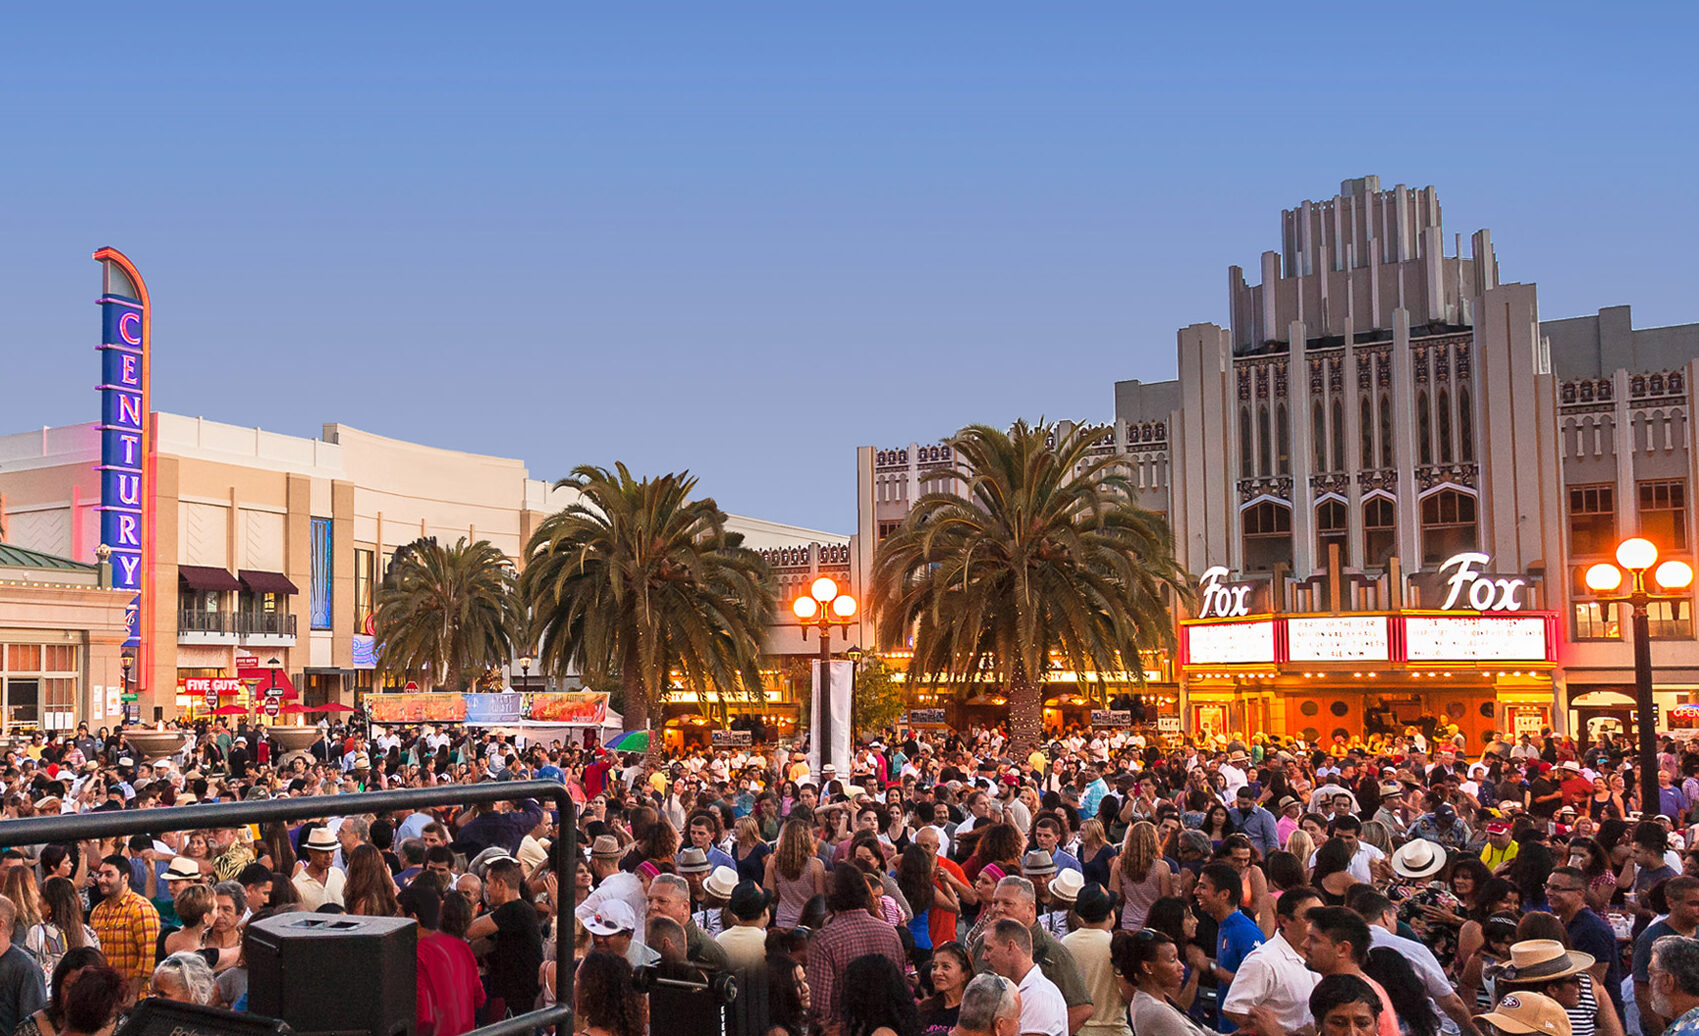 Redwood City's Free "Music on the Square" Friday Nights Summer Fest (2022)